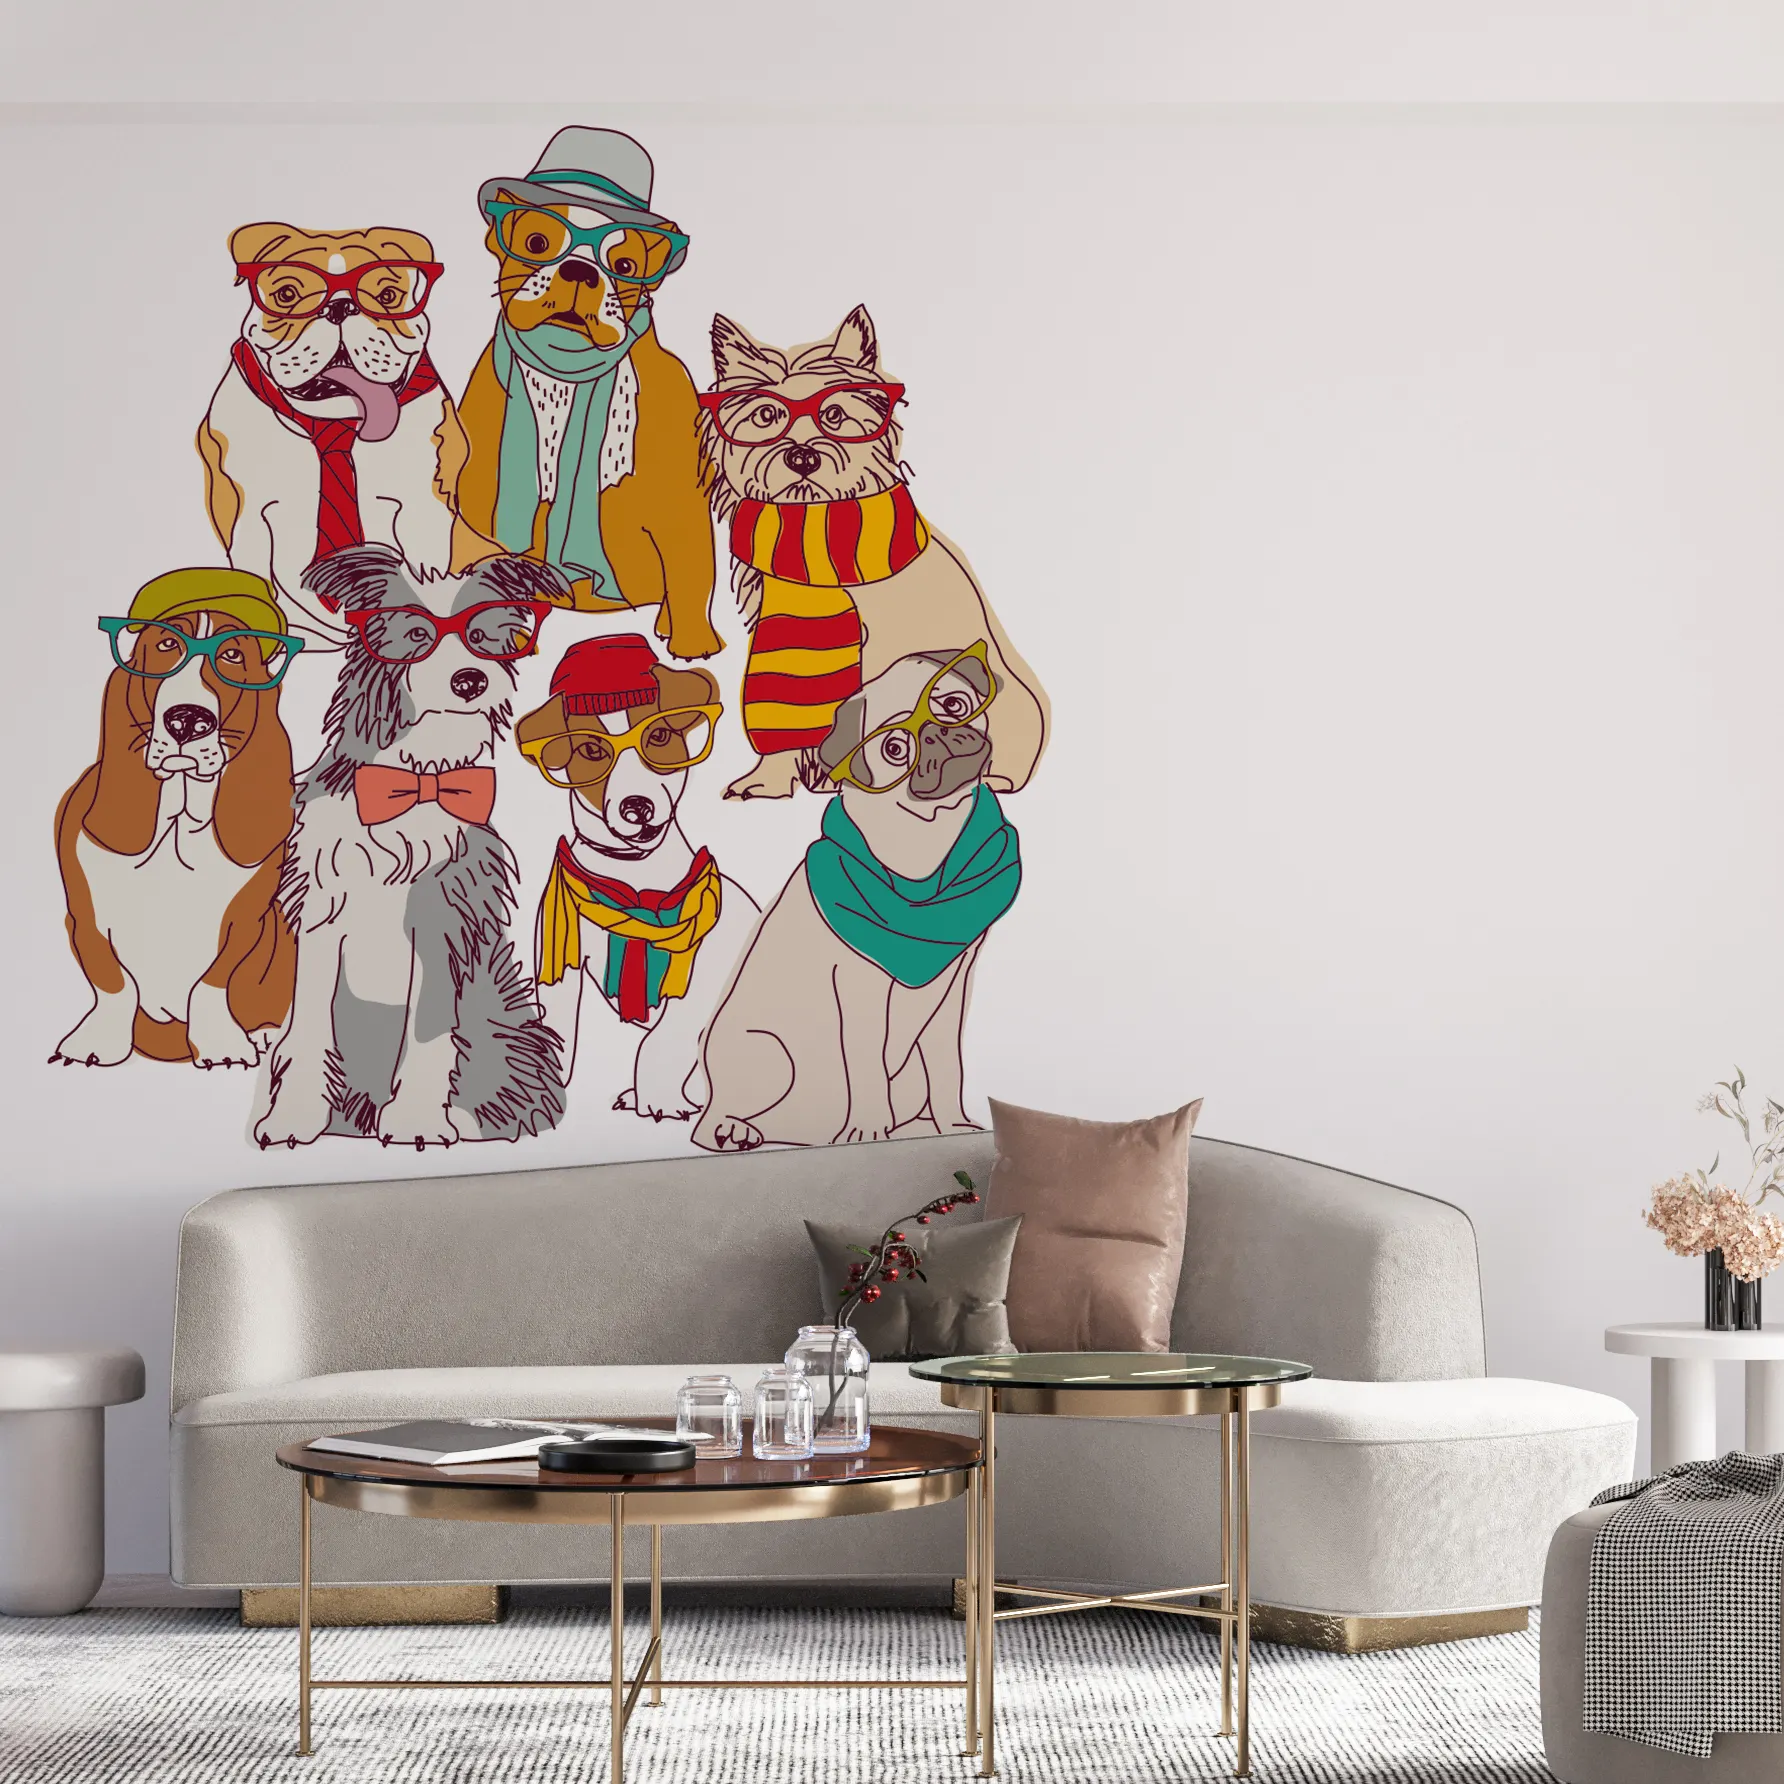 China Factory Supplied Top Quality Wall Decals Kids Room Custom Durable Removable Decals